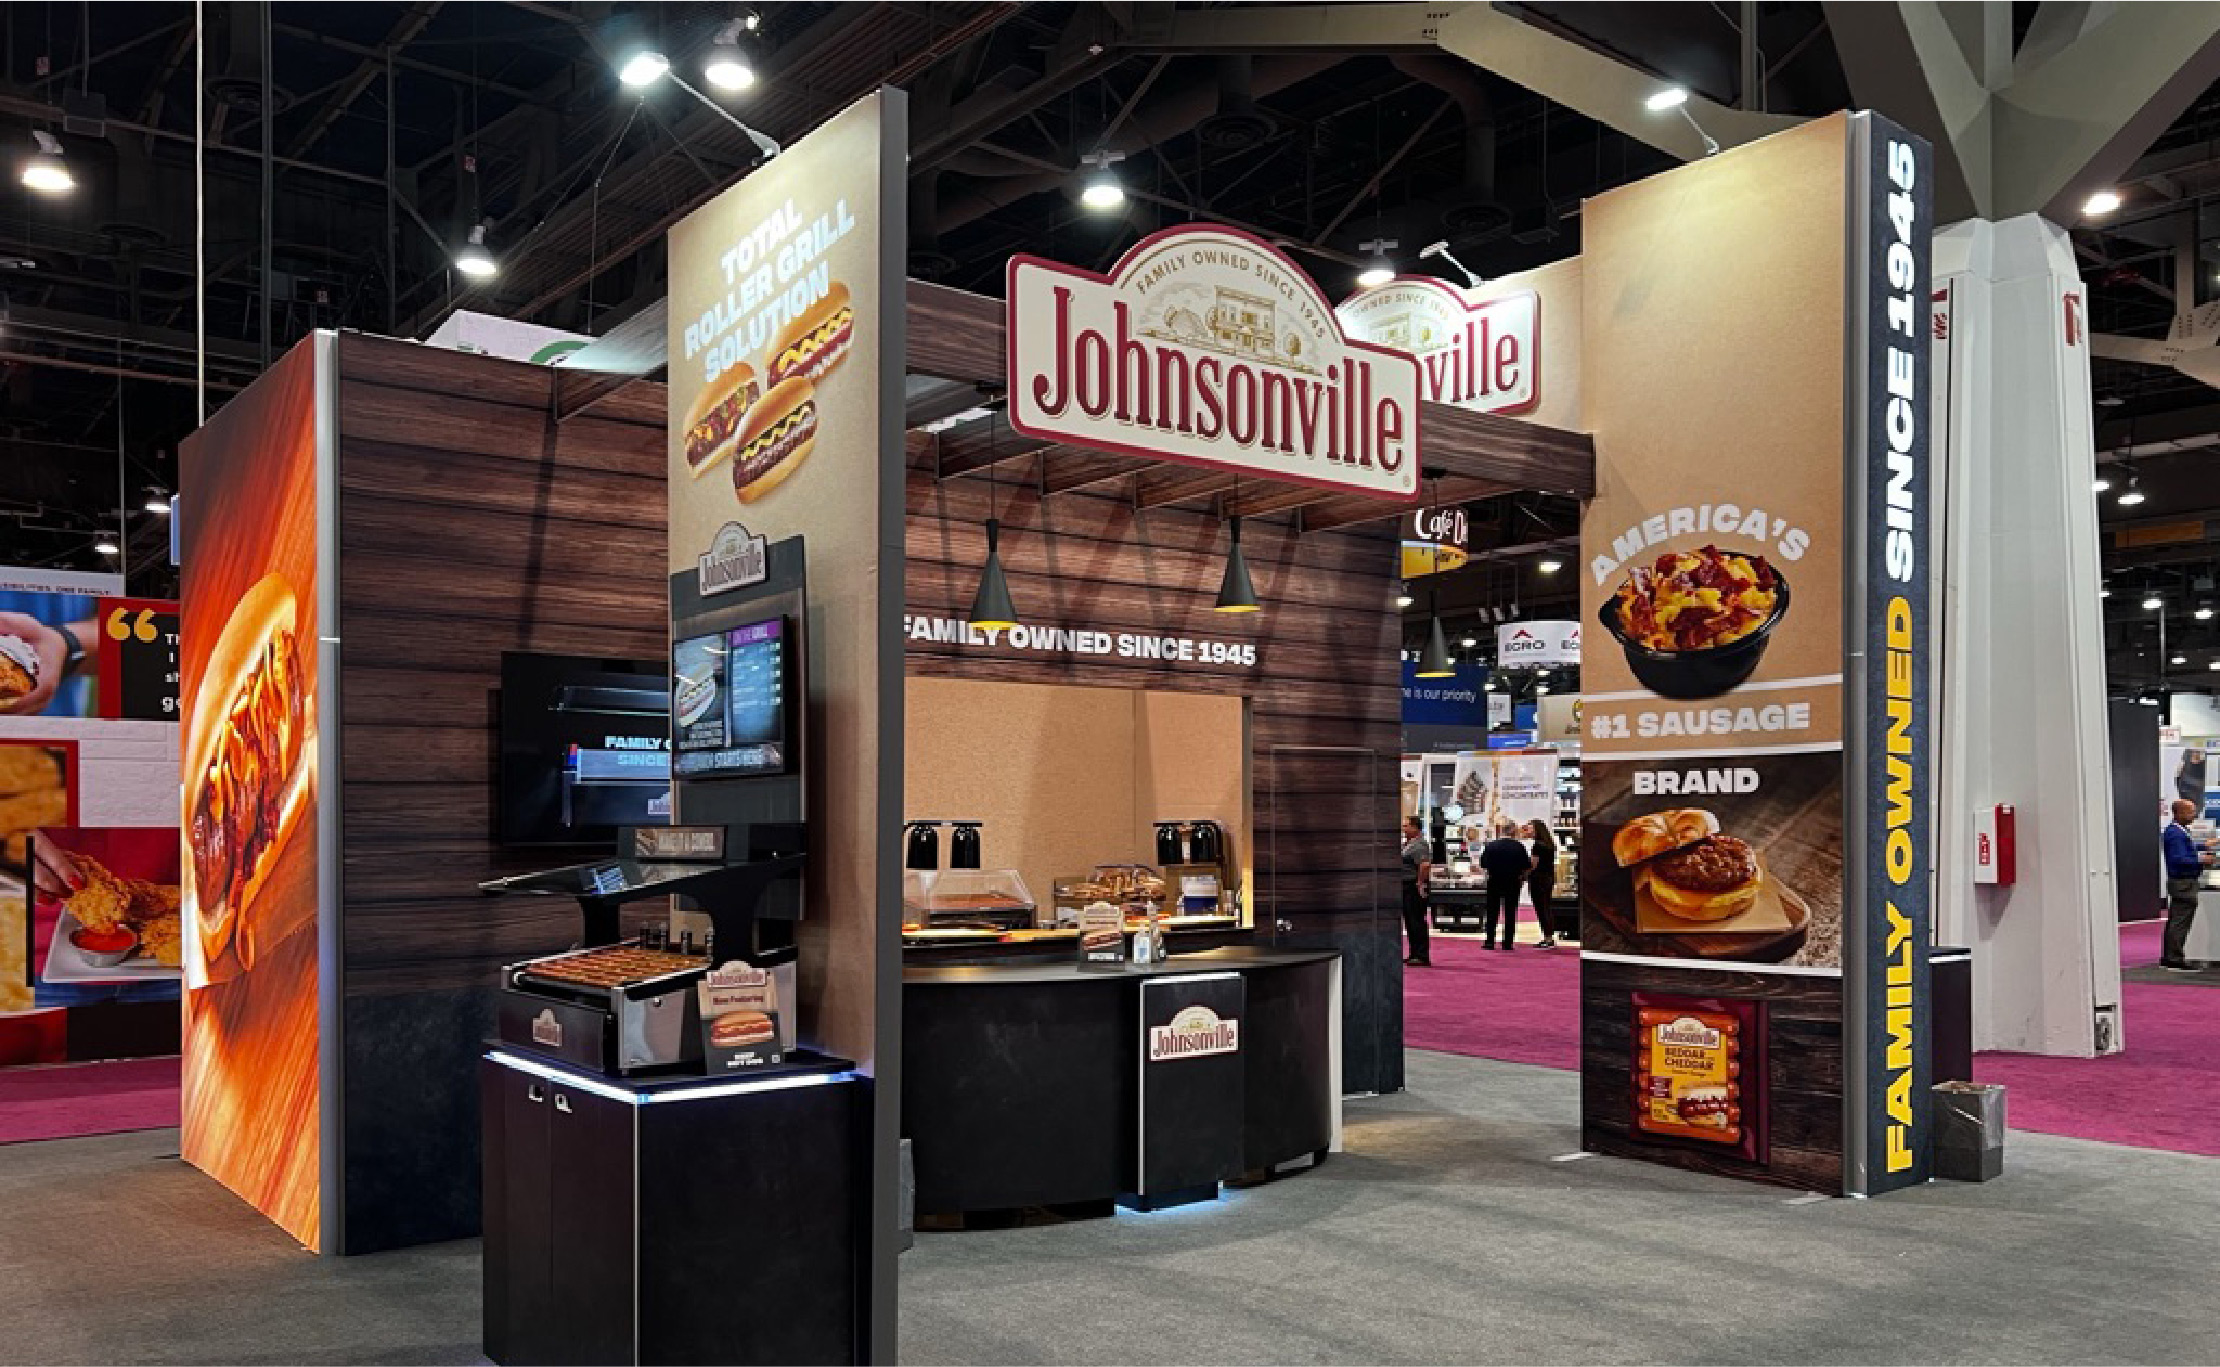 Creative Energy - Johnsonville Trade Show Graphics & Roller Grill Video